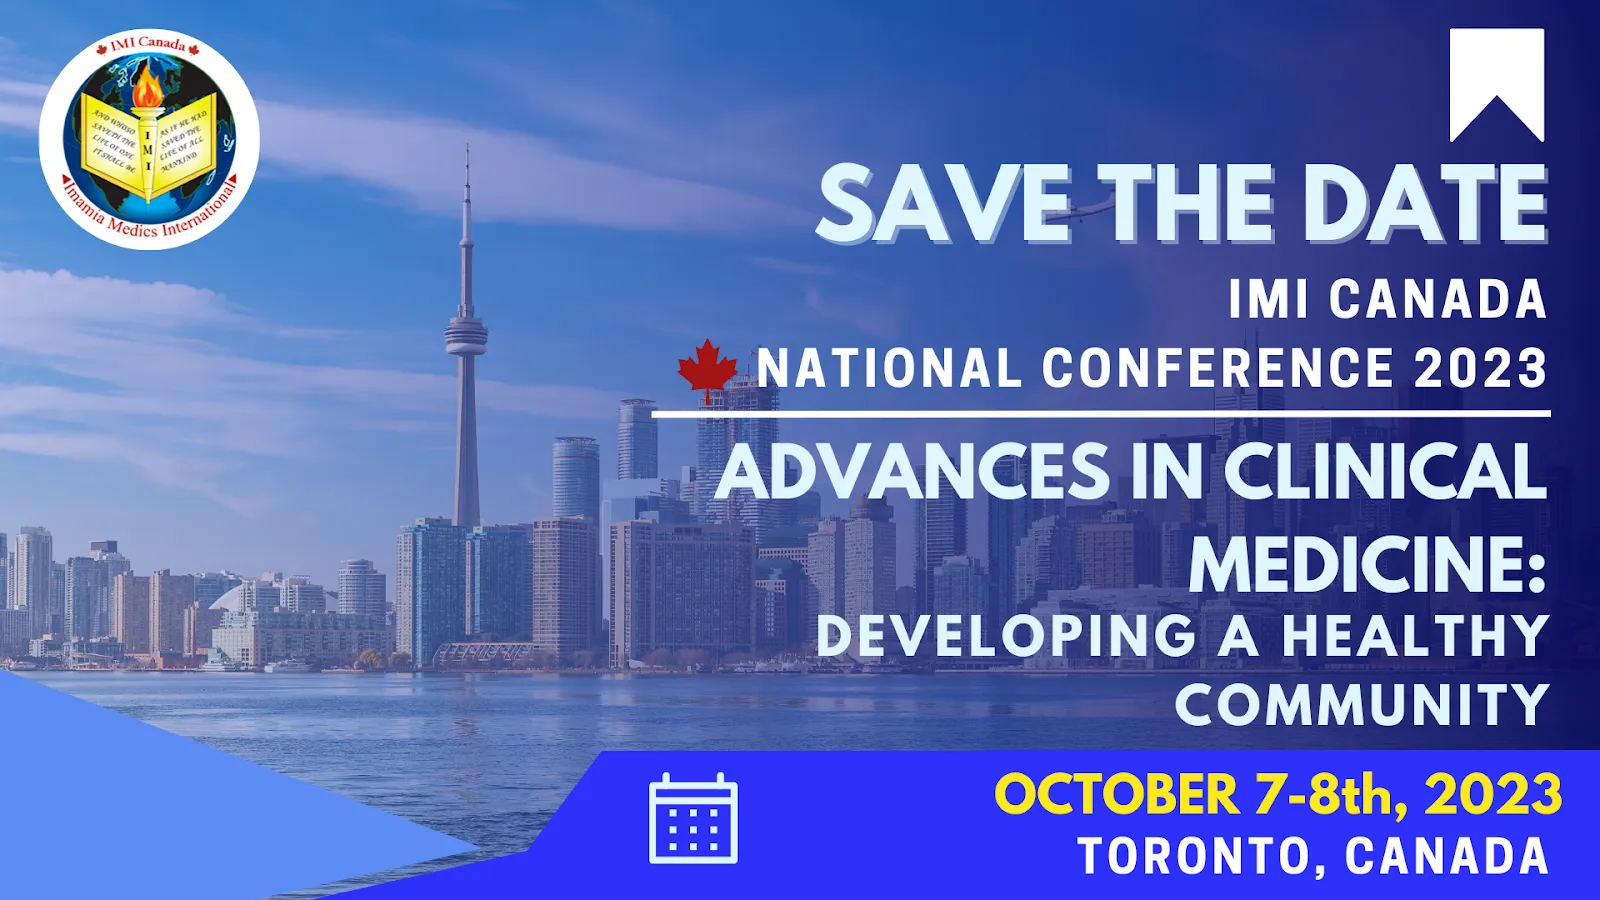 Save the date to join us in Toronto, Canada for IMI Canada’s National Conference: Recent Advances in Clinical Medicine for a Healthy Community